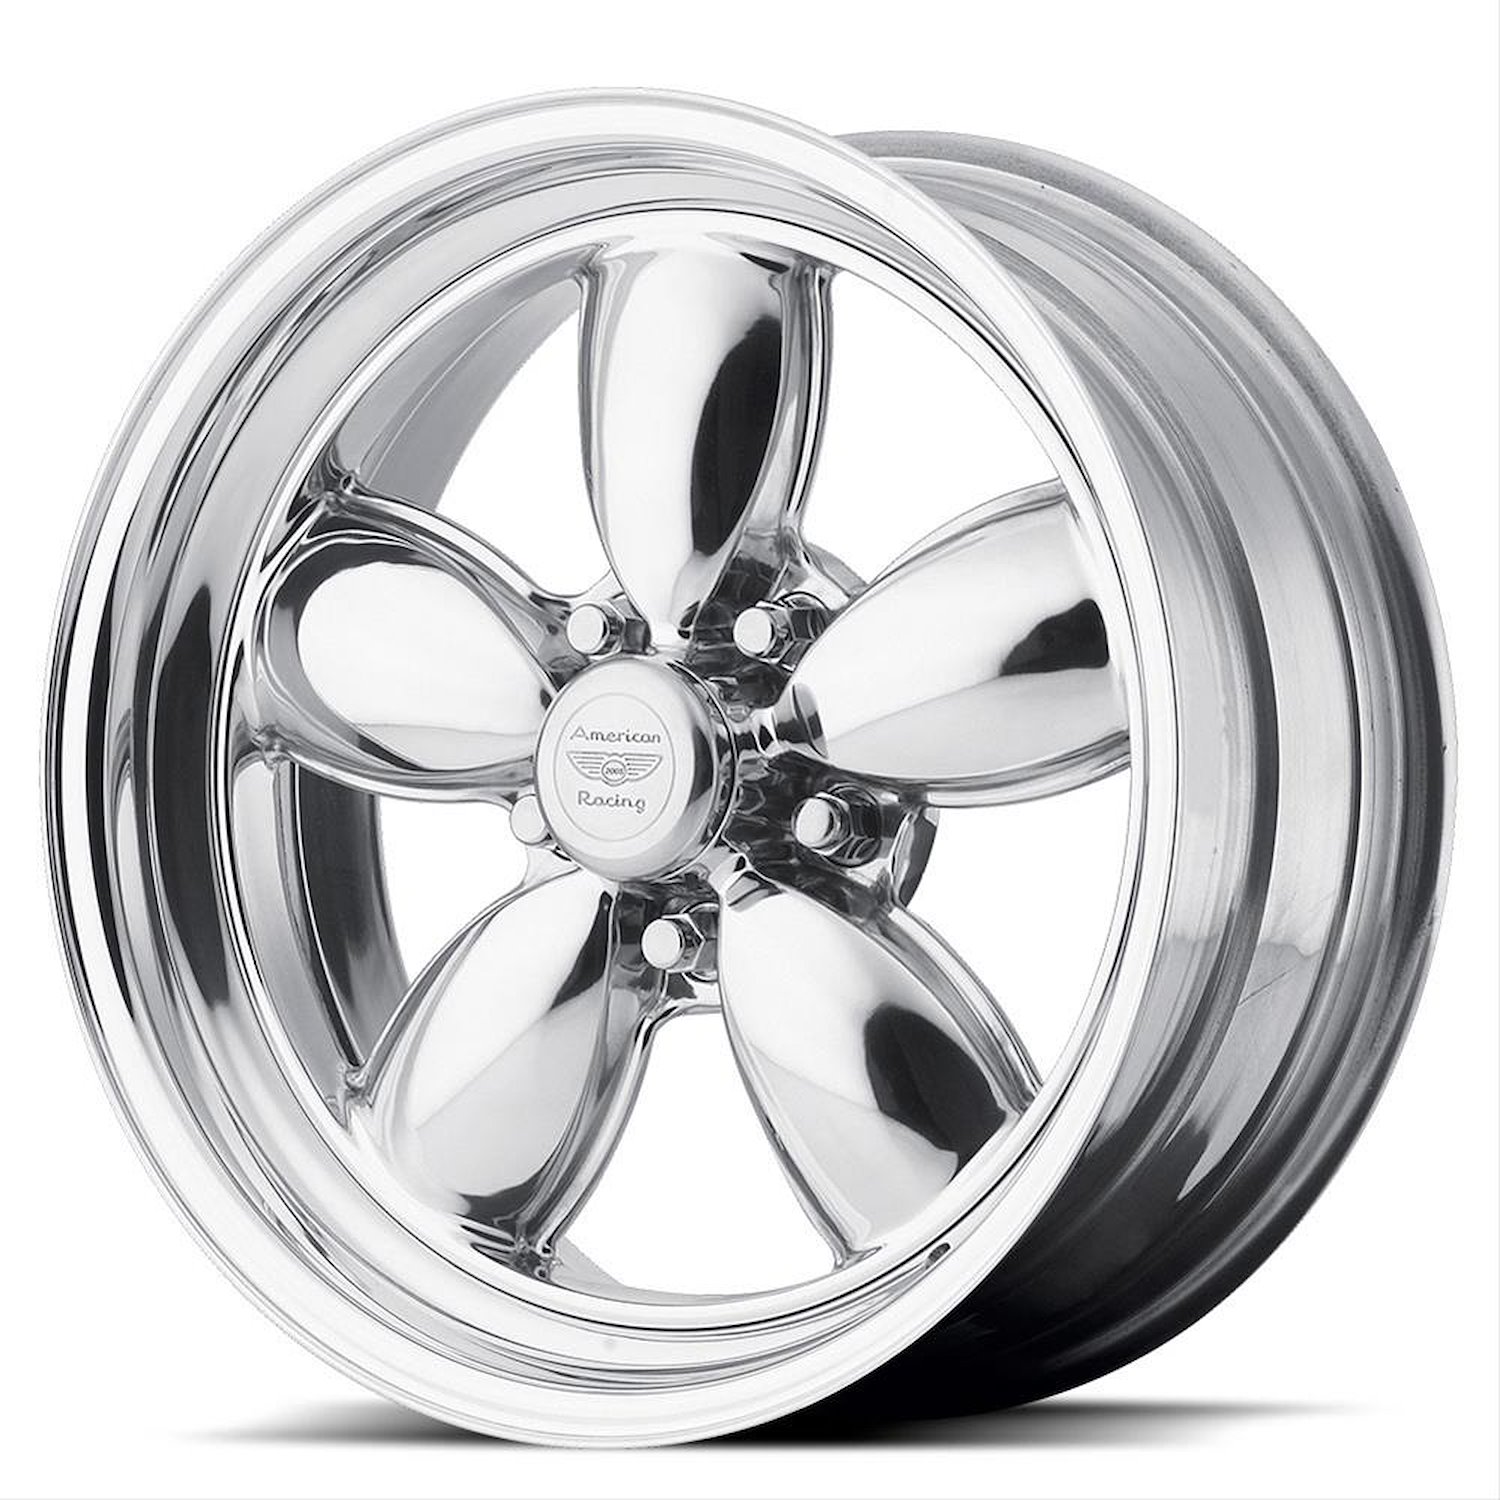 AMERICAN RACING CLASSIC 200S TWO-PIECE POLISHED 17 x 9.5 5x4.5 -32 3.99